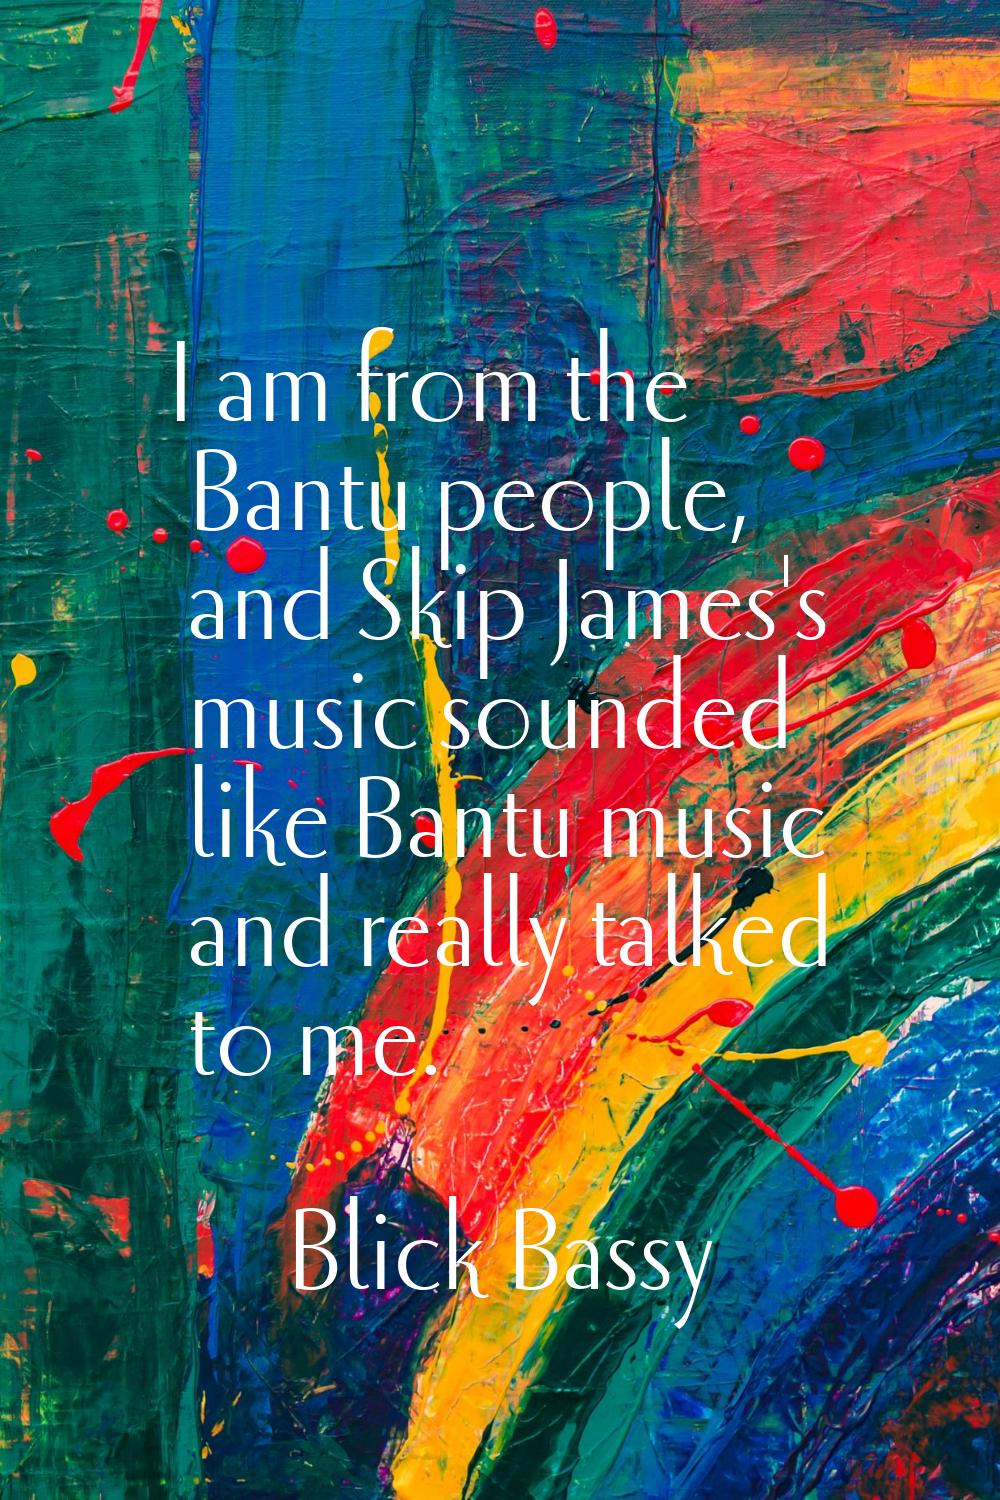 I am from the Bantu people, and Skip James's music sounded like Bantu music and really talked to me